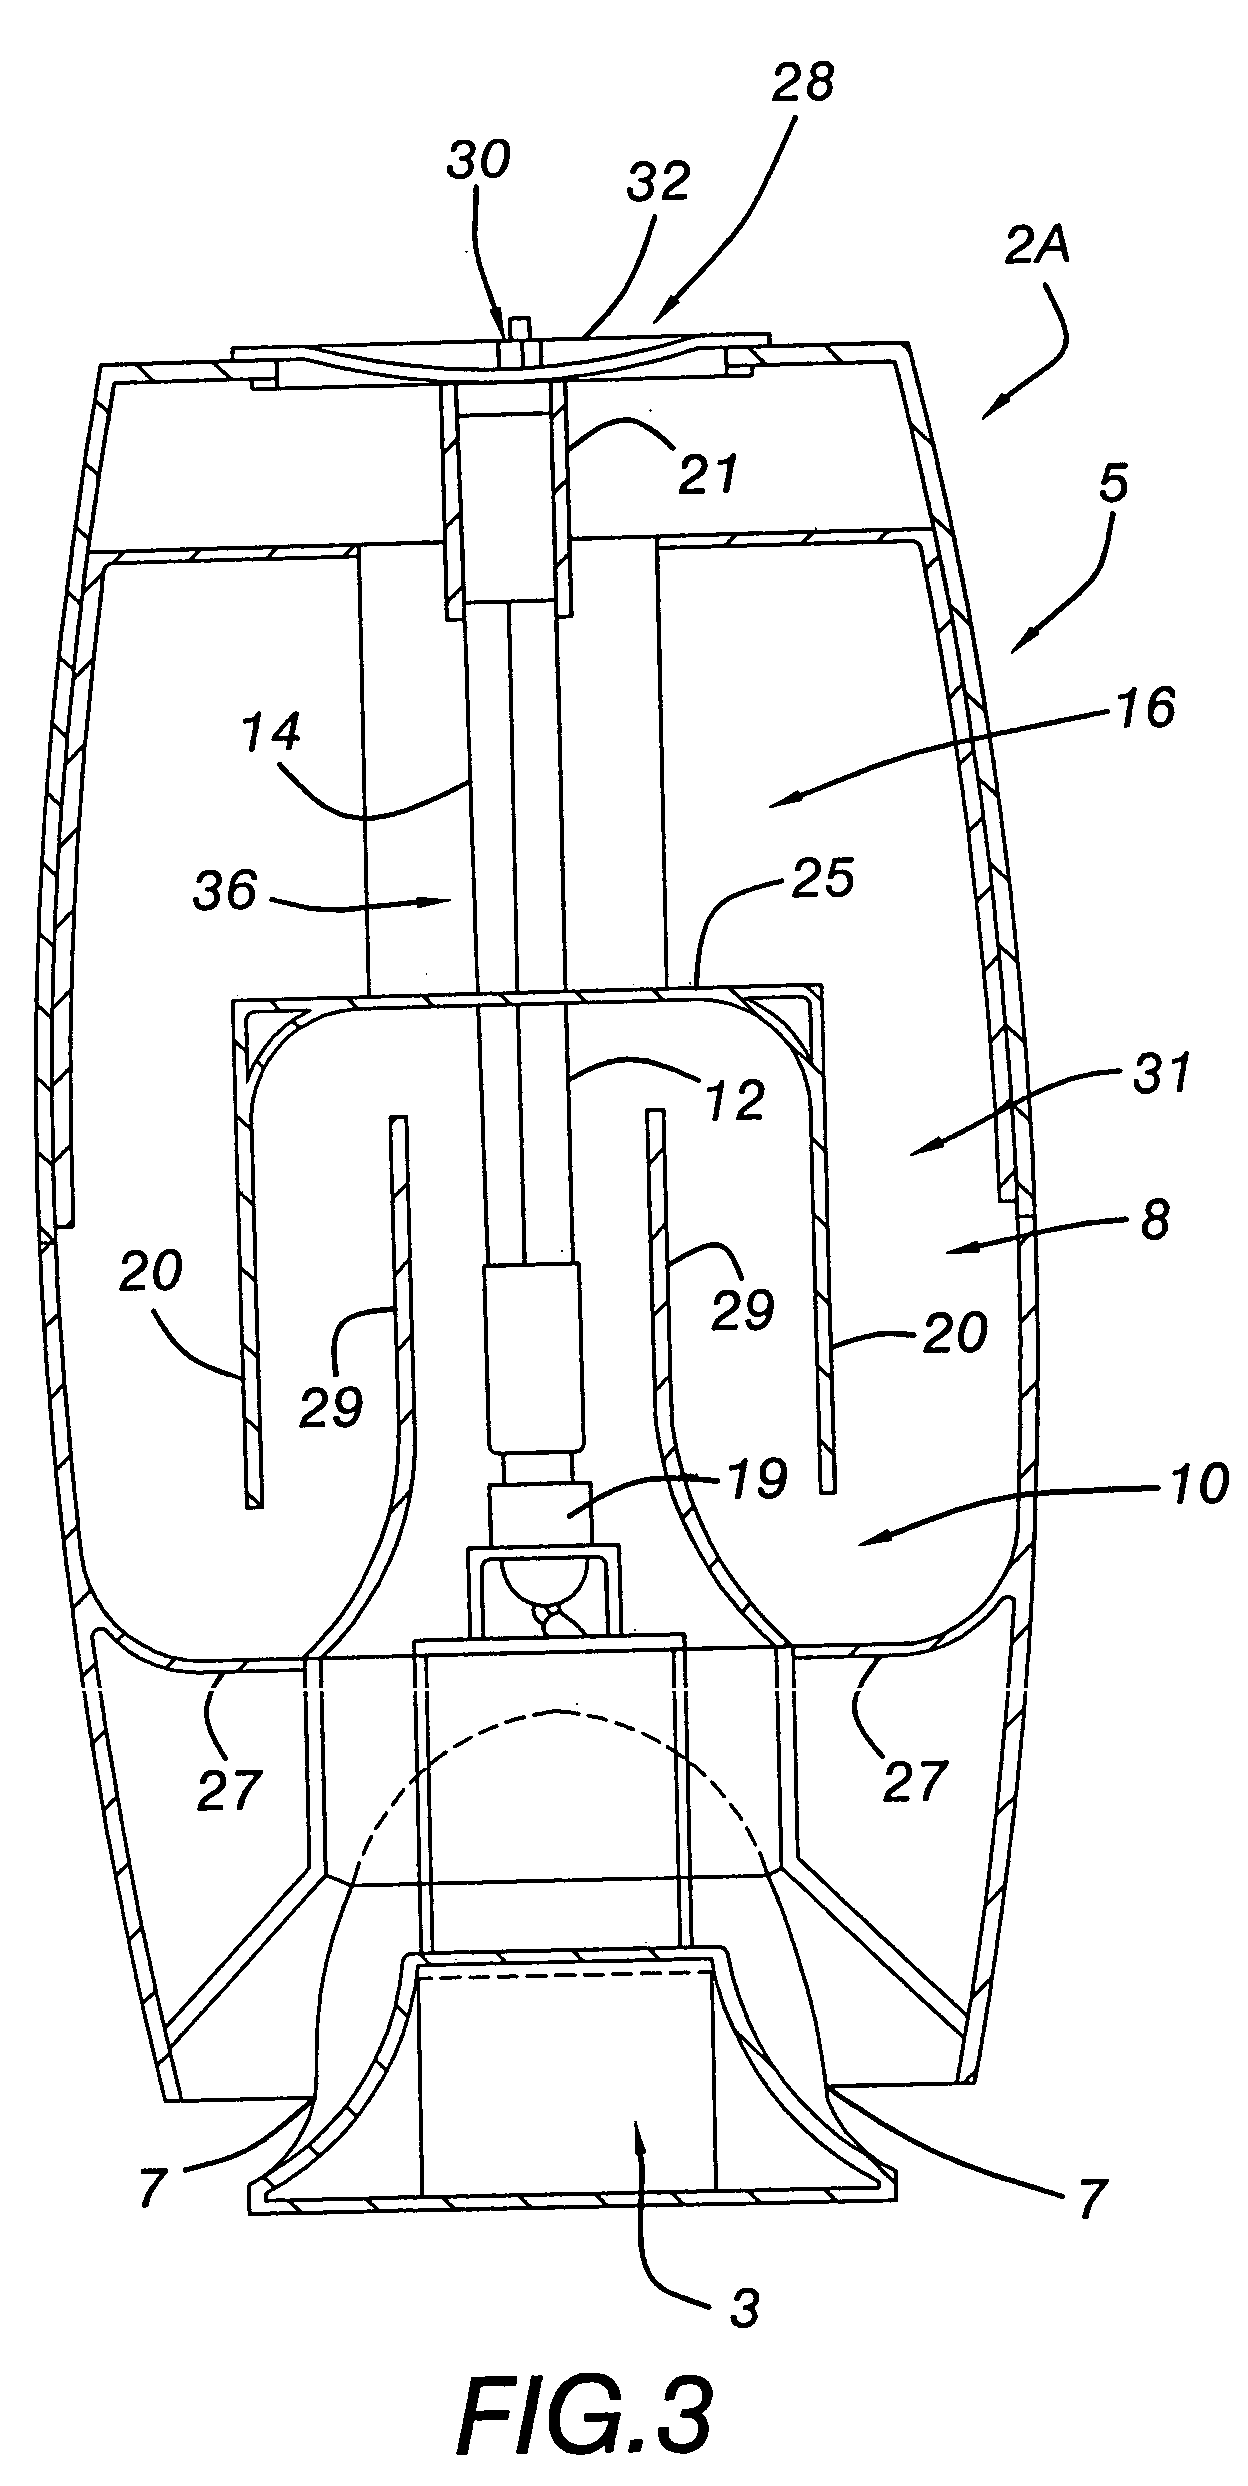 Method and apparatus for producing purified or ozone enriched air to remove contaminants from fluids